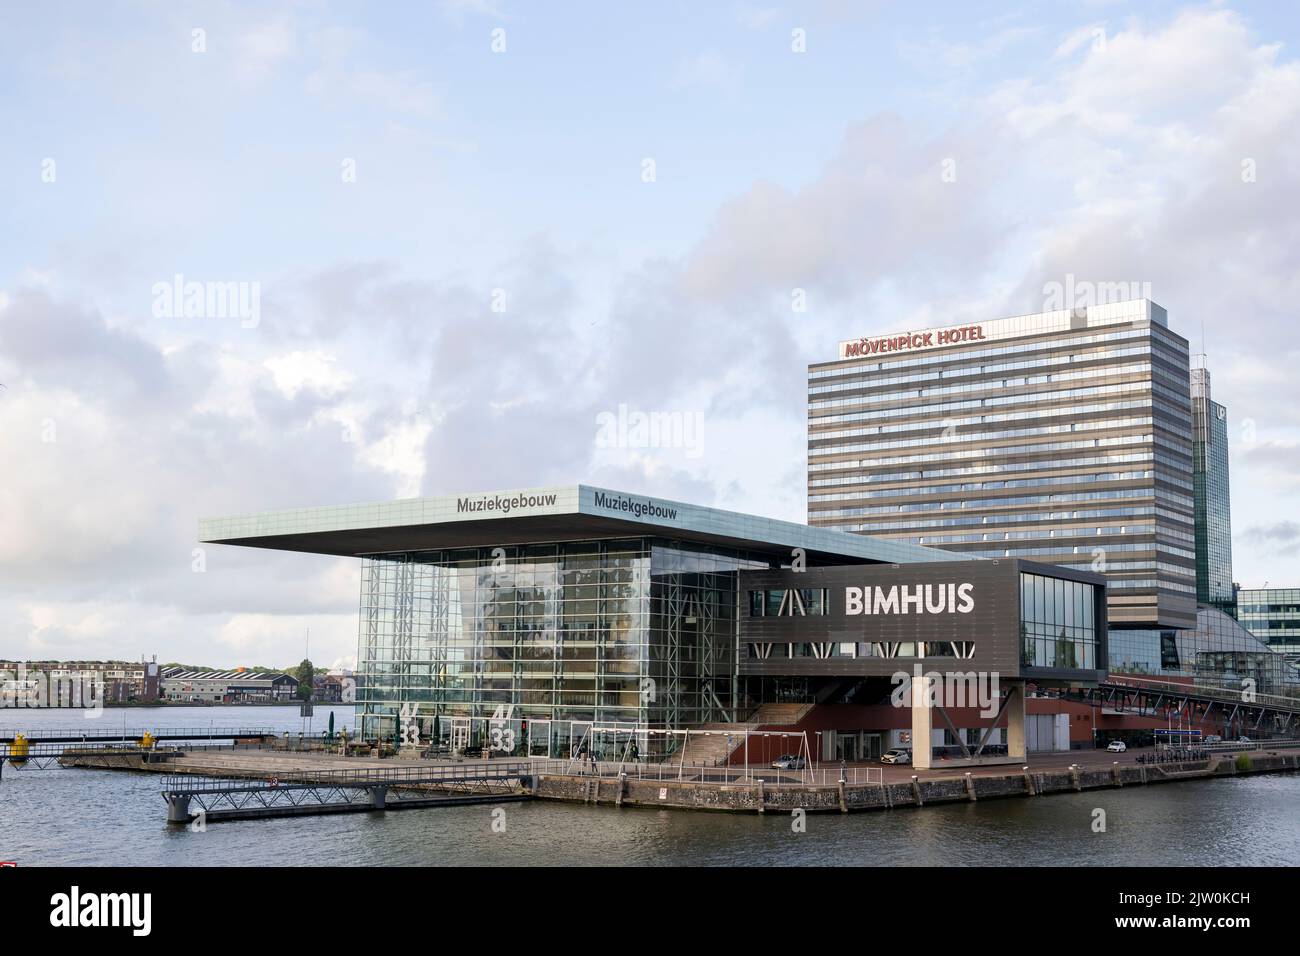 A general view of the outside of the Amsterdam passenger cruise terminal in Amsterdam, Holland. Stock Photo